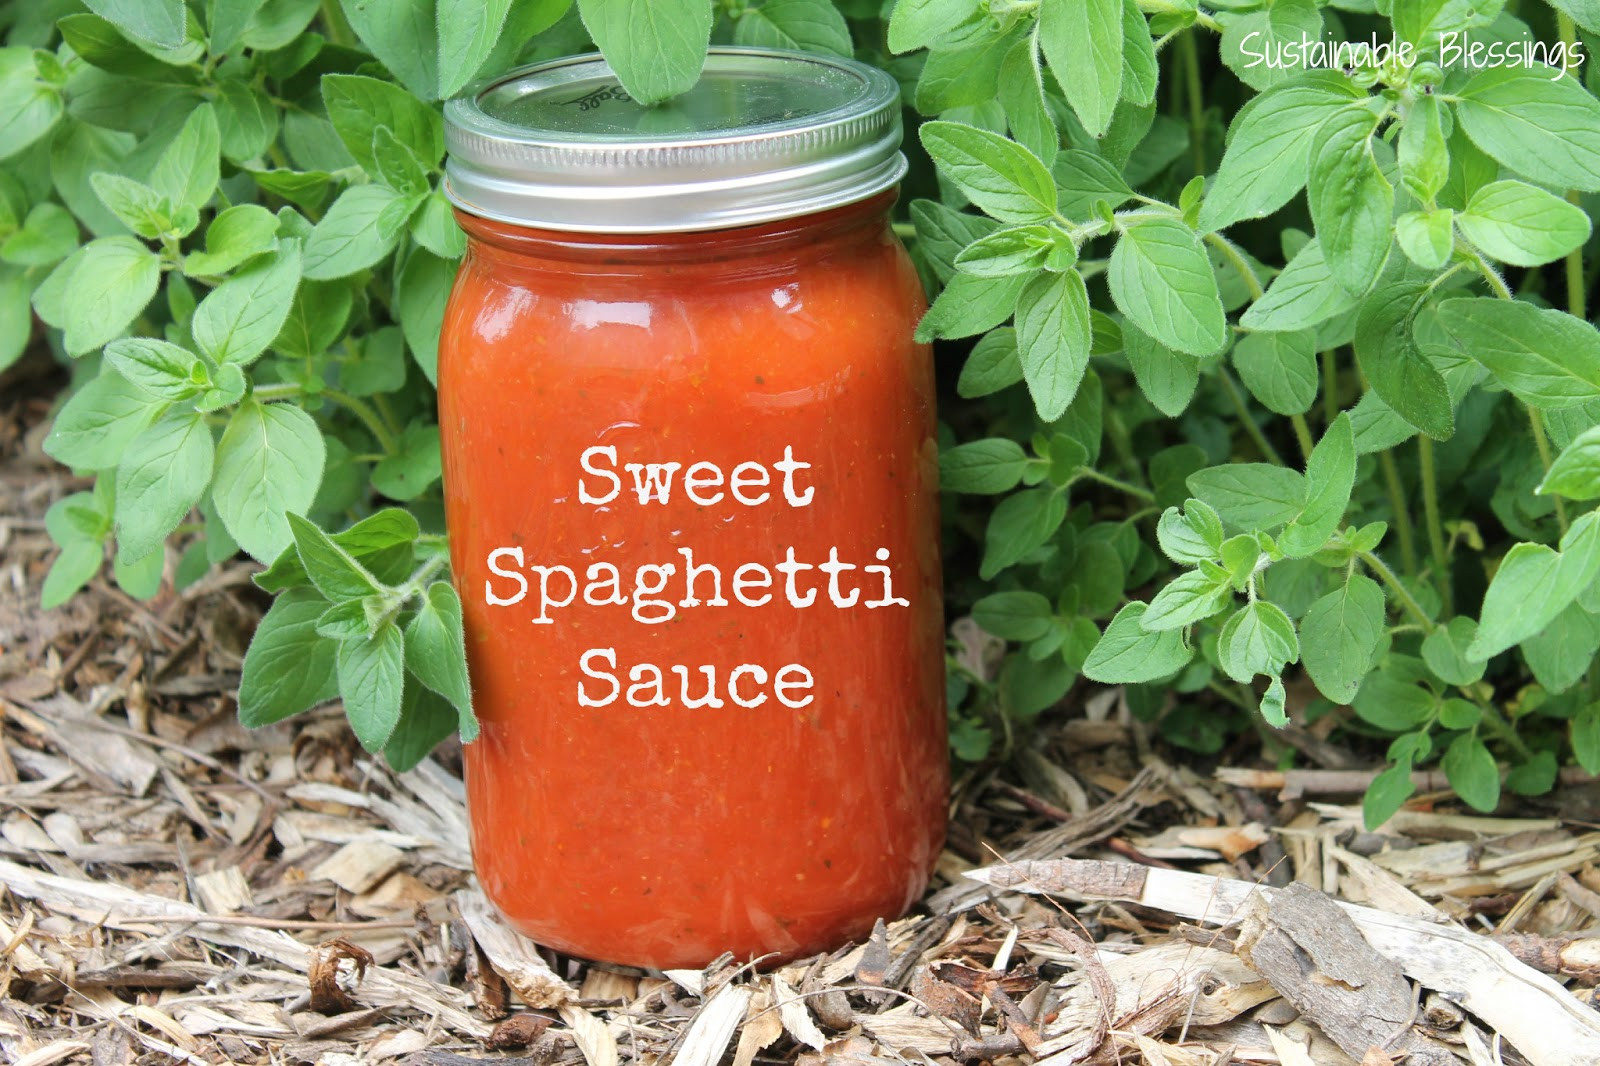 Sweet Spaghetti Sauce
 Sustainable Blessings Sweet Spaghetti Sauce